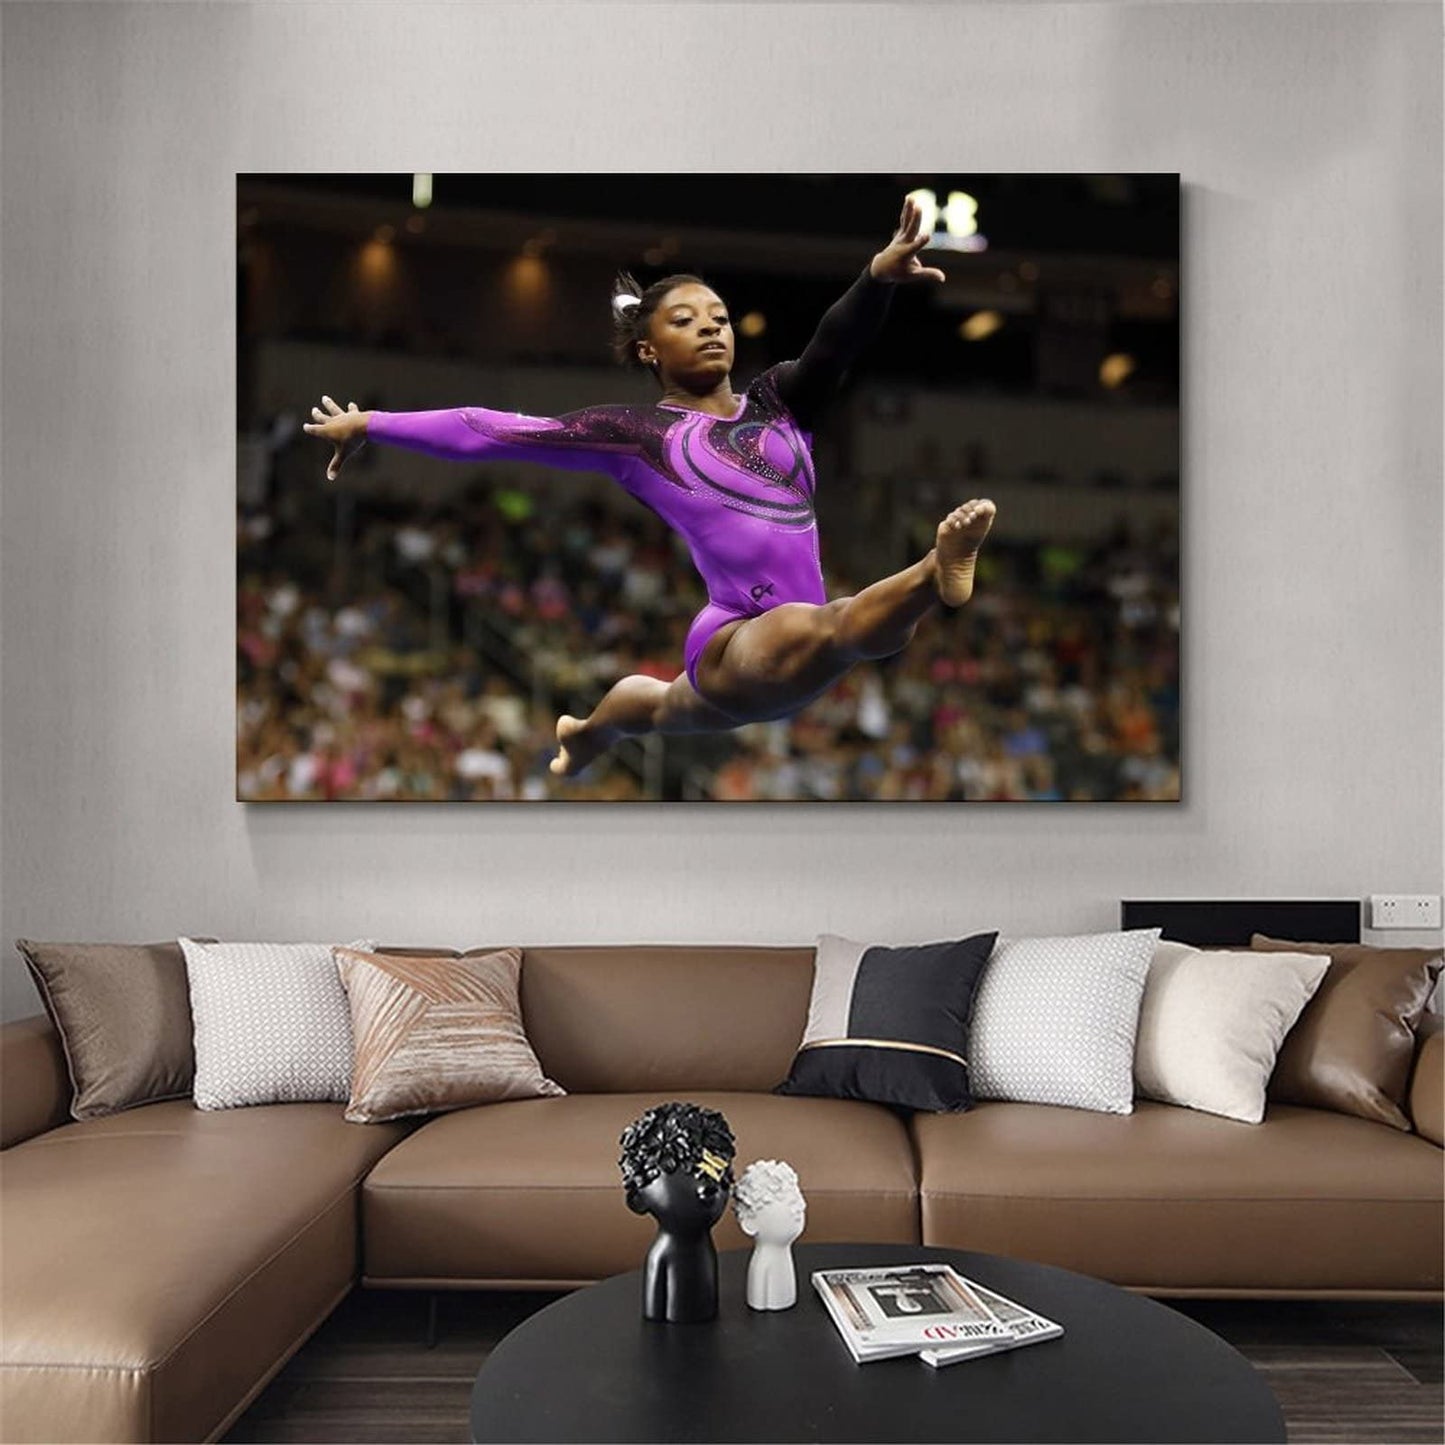 BUUTUUCE SIMONE BILES Canvas Art Poster and Wall Art Picture Print Modern Family bedroom Decor Posters 08x12inch(20x30cm)